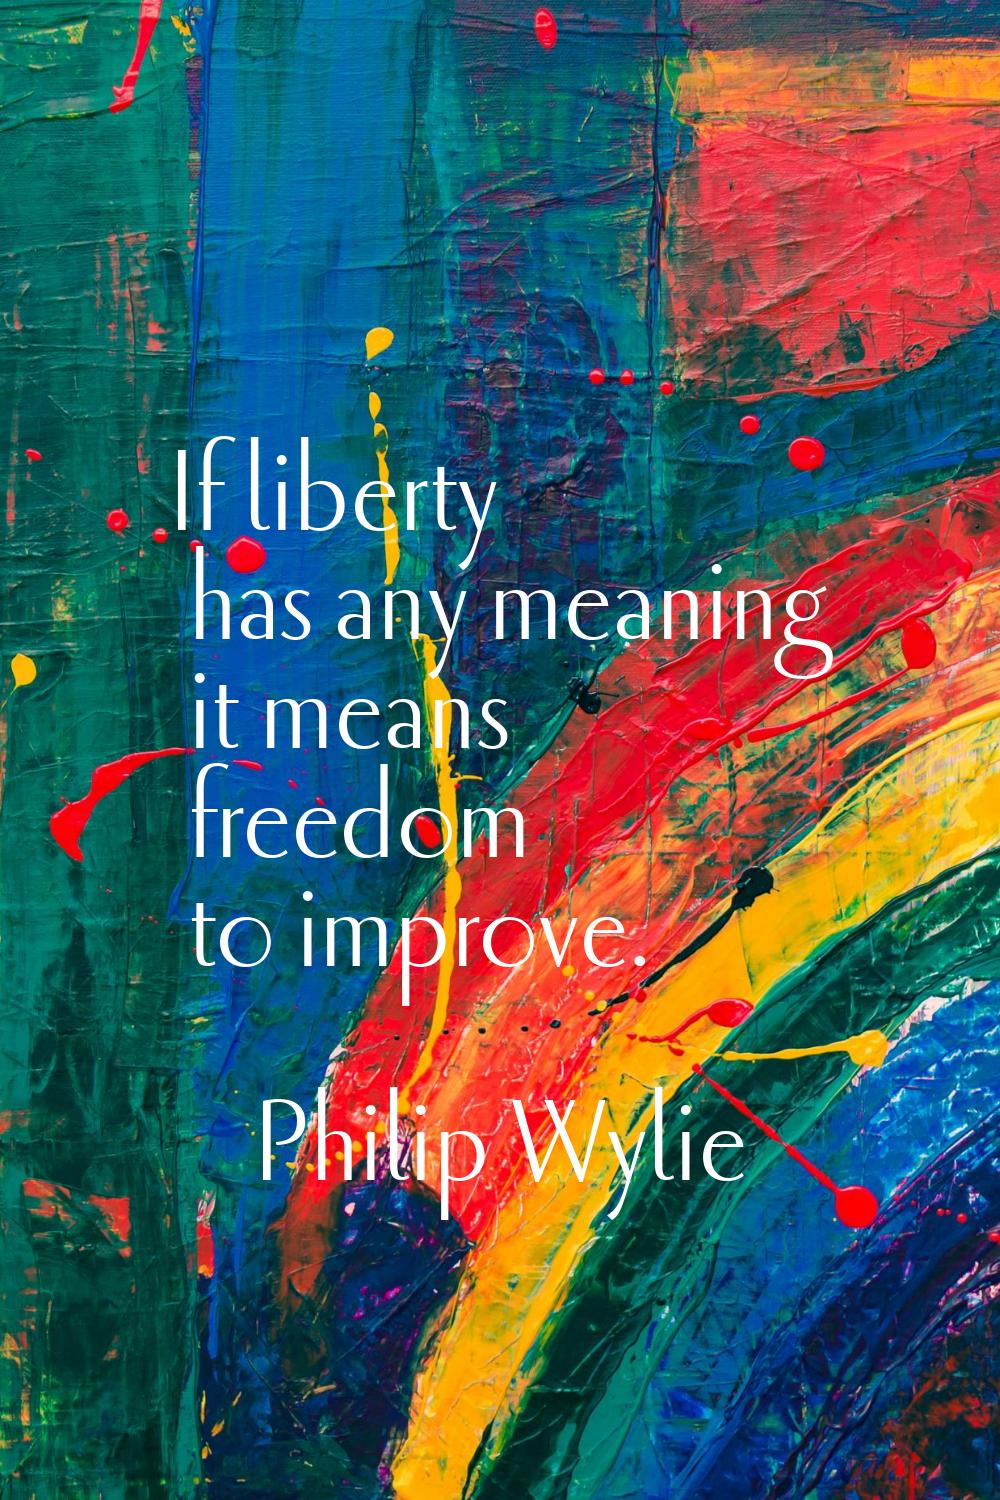 If liberty has any meaning it means freedom to improve.